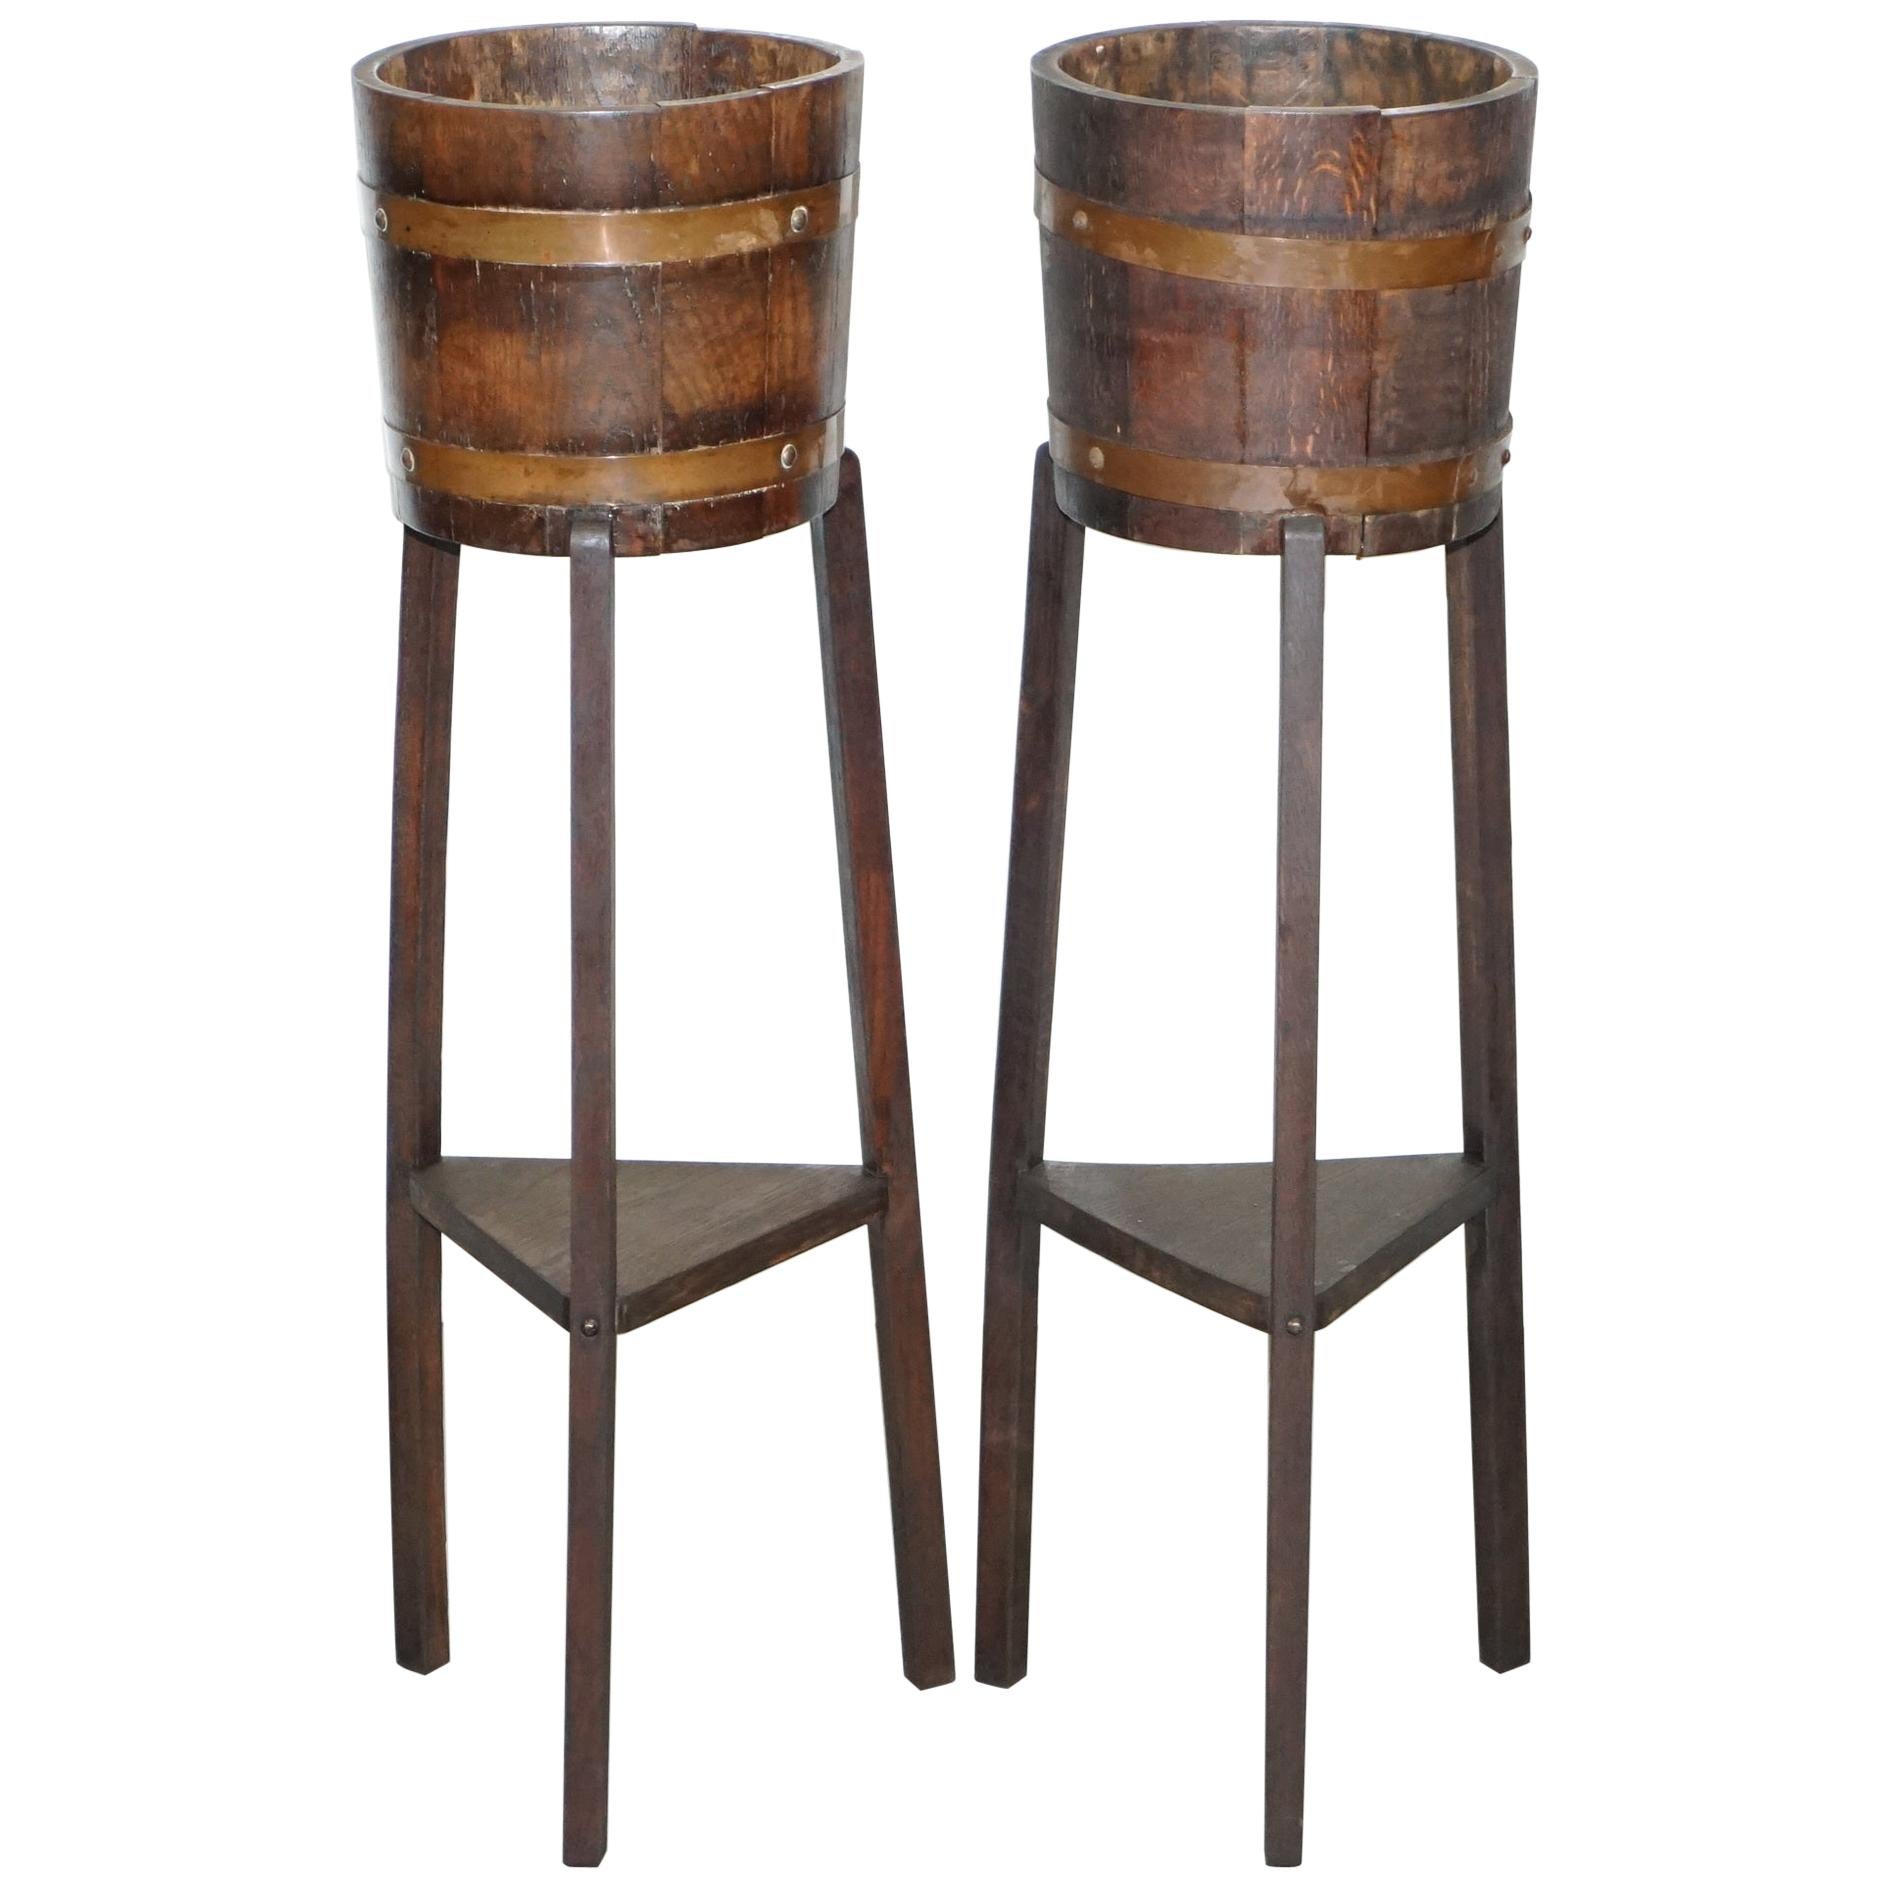 Restored Pair of R A Lister & Co Plant Stands Lovely Barrel Design, circa 1900